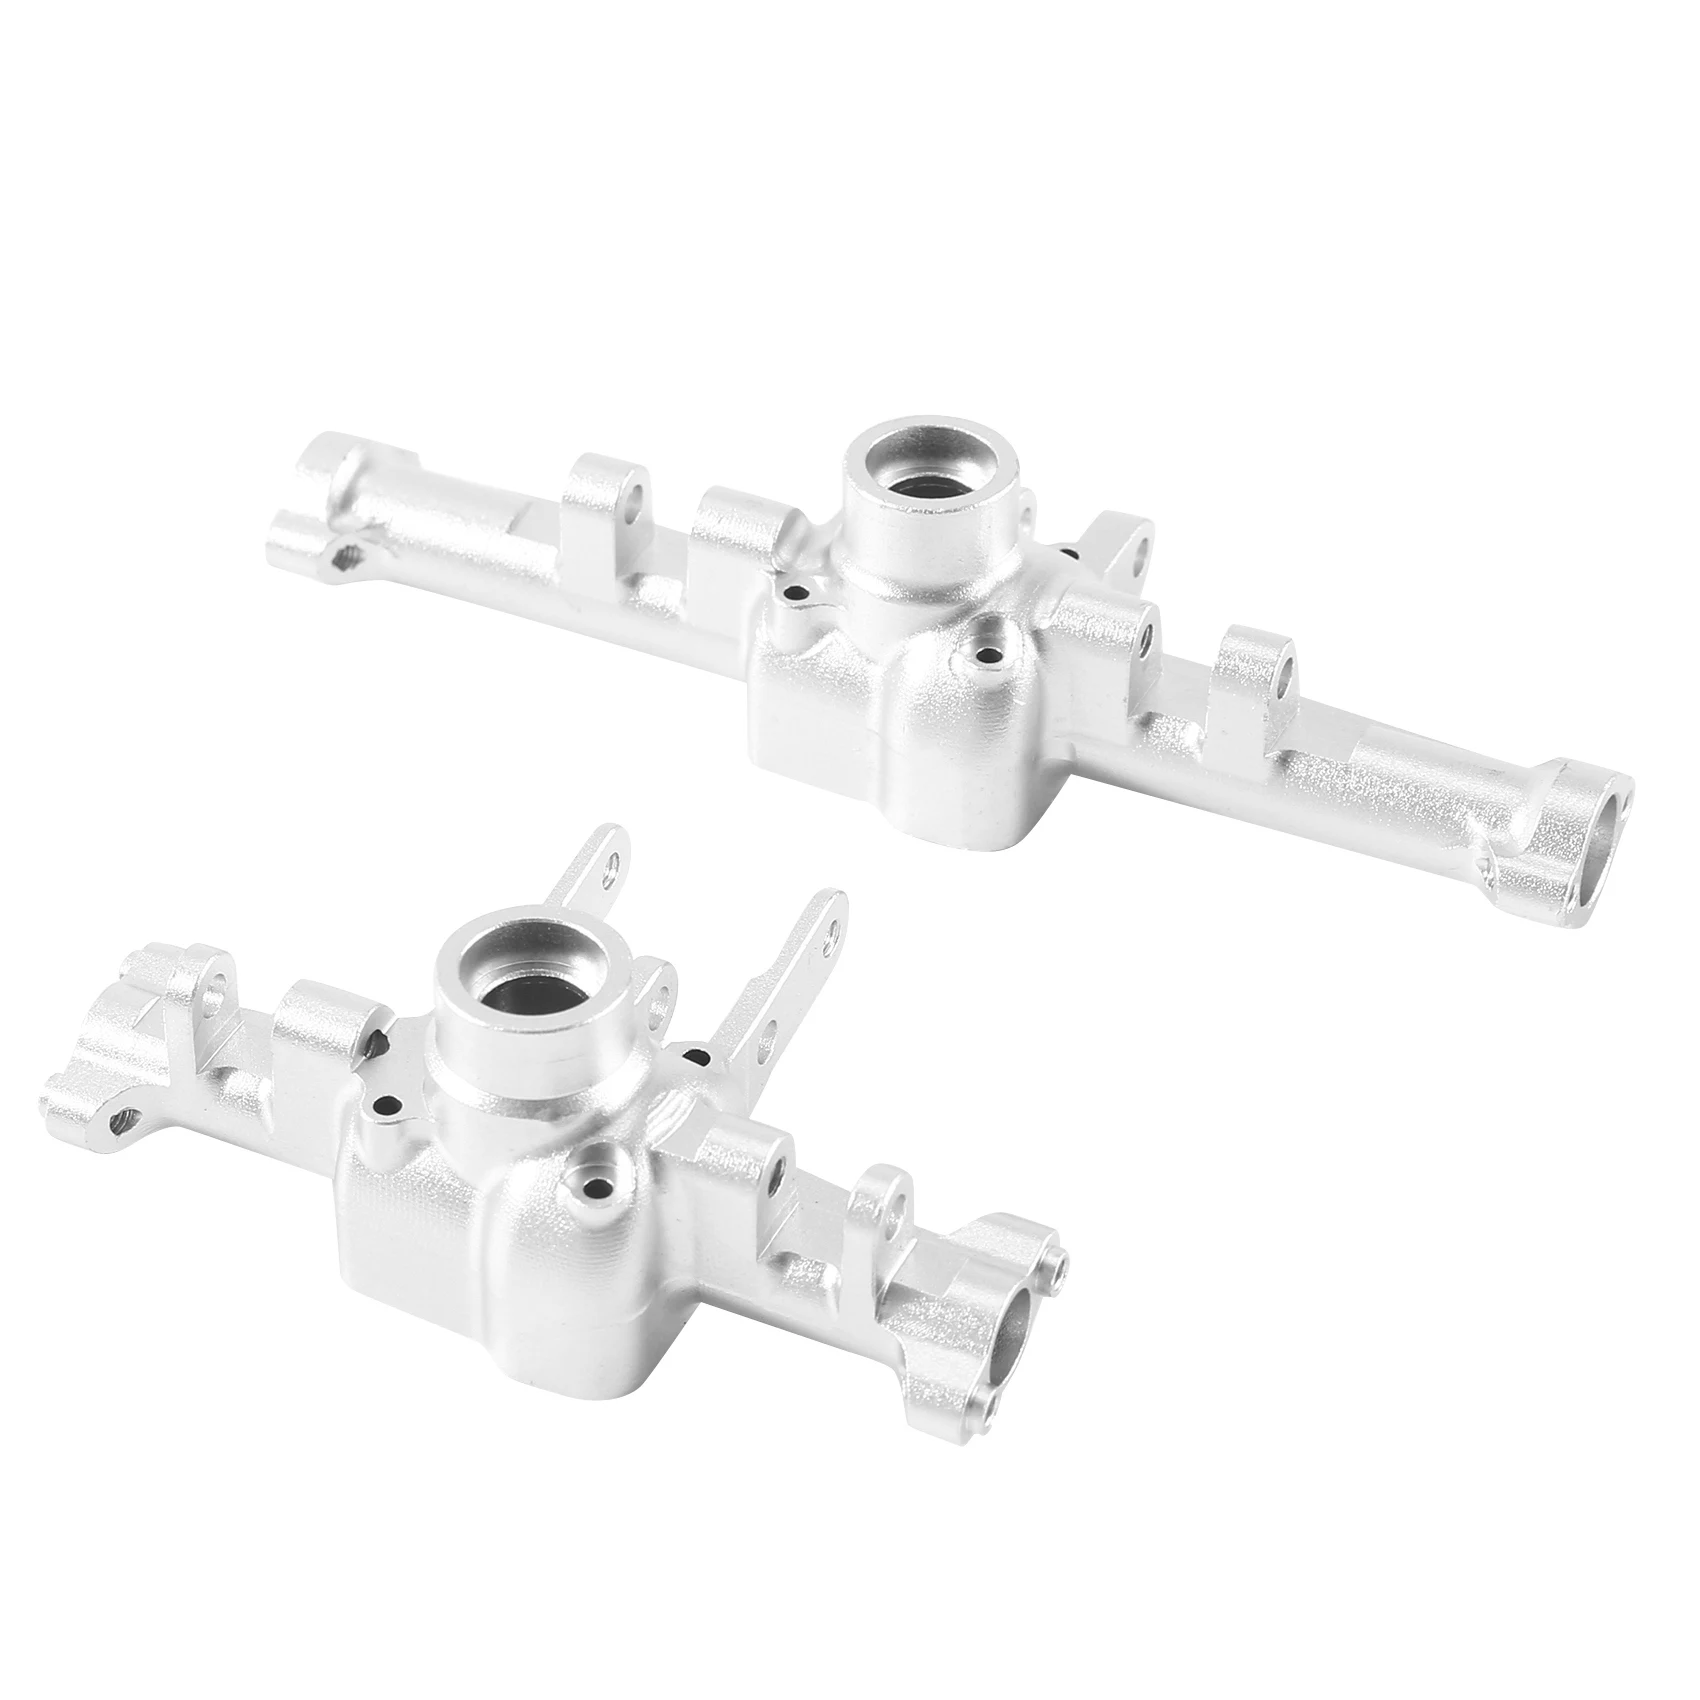 

2Pcs Metal Front and Rear Axle Housing for Traxxas TRX4M TRX-4M 1/18 RC Crawler Car Upgrade Parts,3